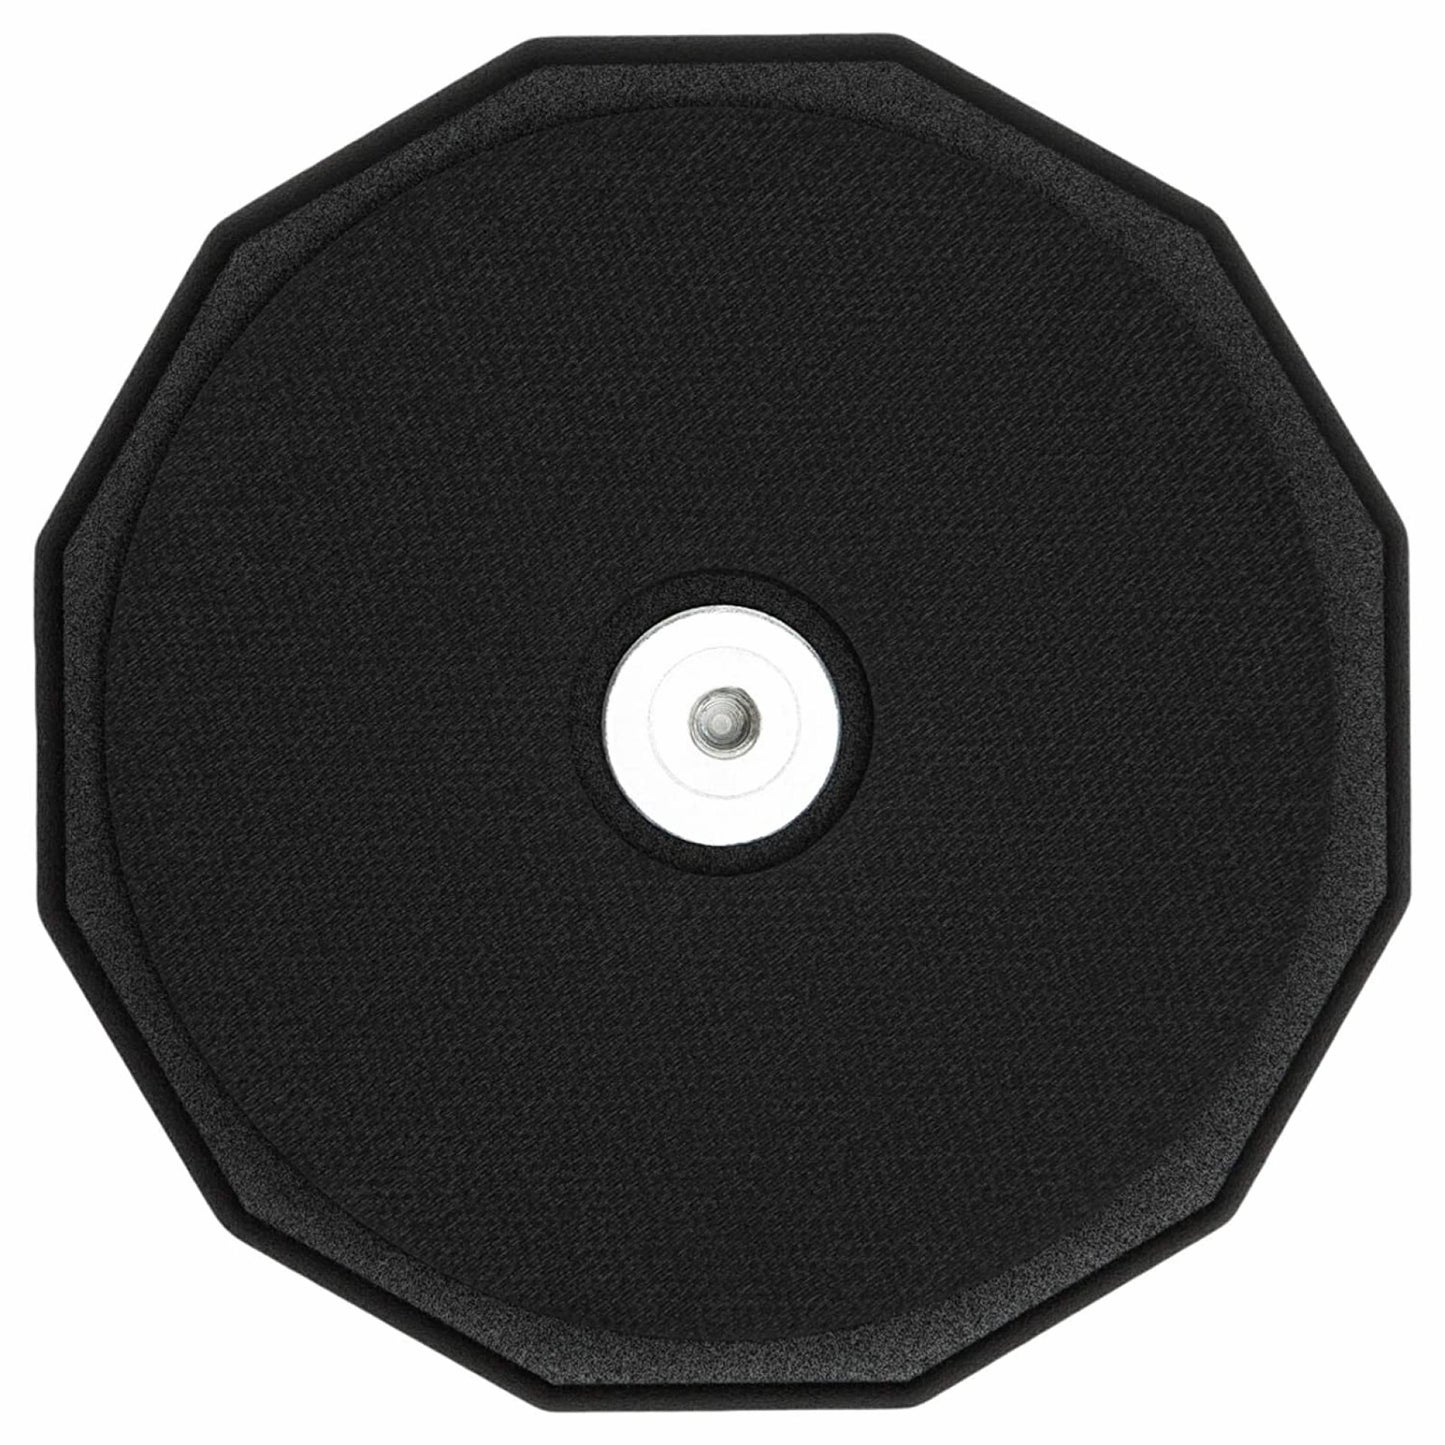 Vic Firth VIC*PAD 6 Drum Pad 6 inches